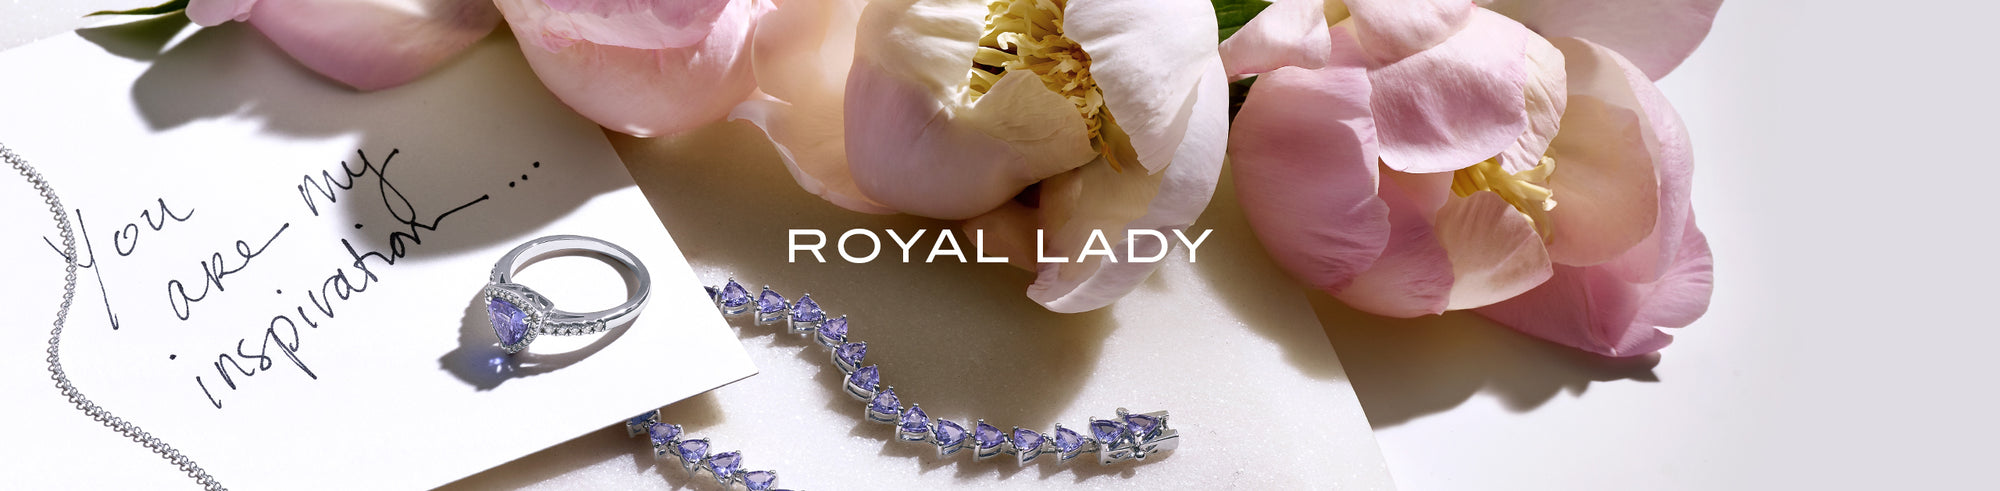 Effy Jewelry Mother's Day Royal Lady